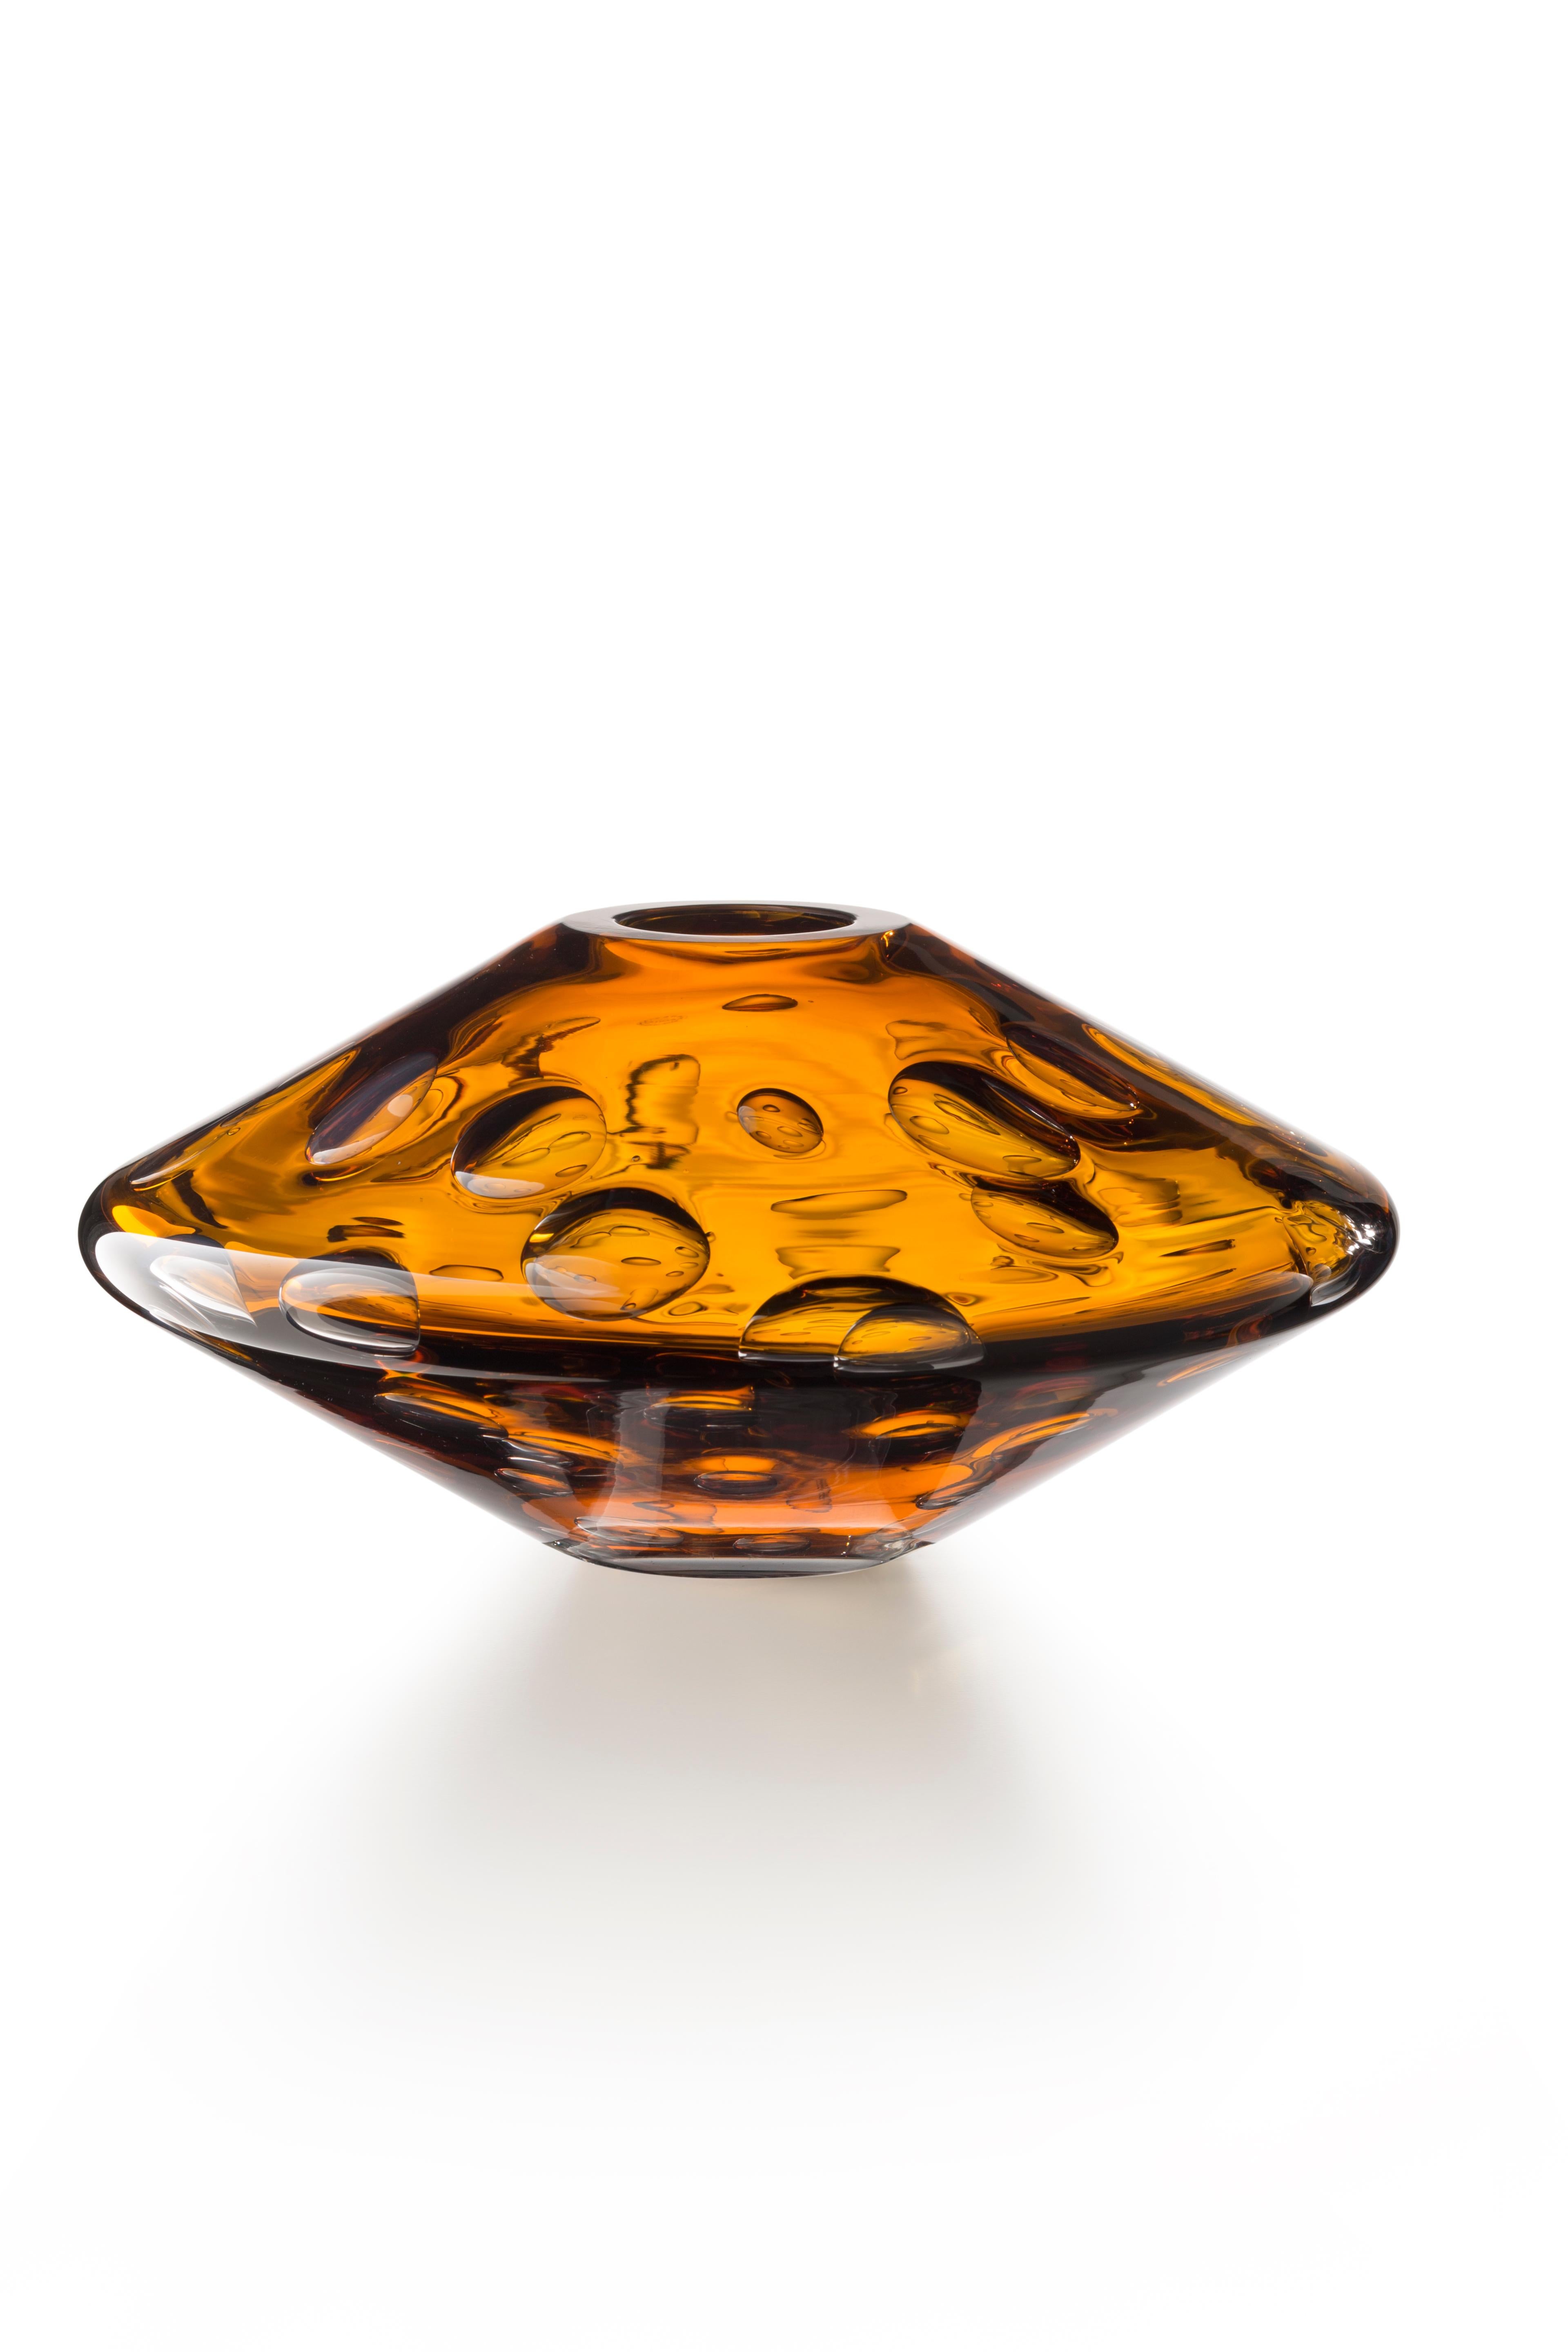 Brown (01443) Small Millebolle Murano Glass Vases by Luca Nichetto